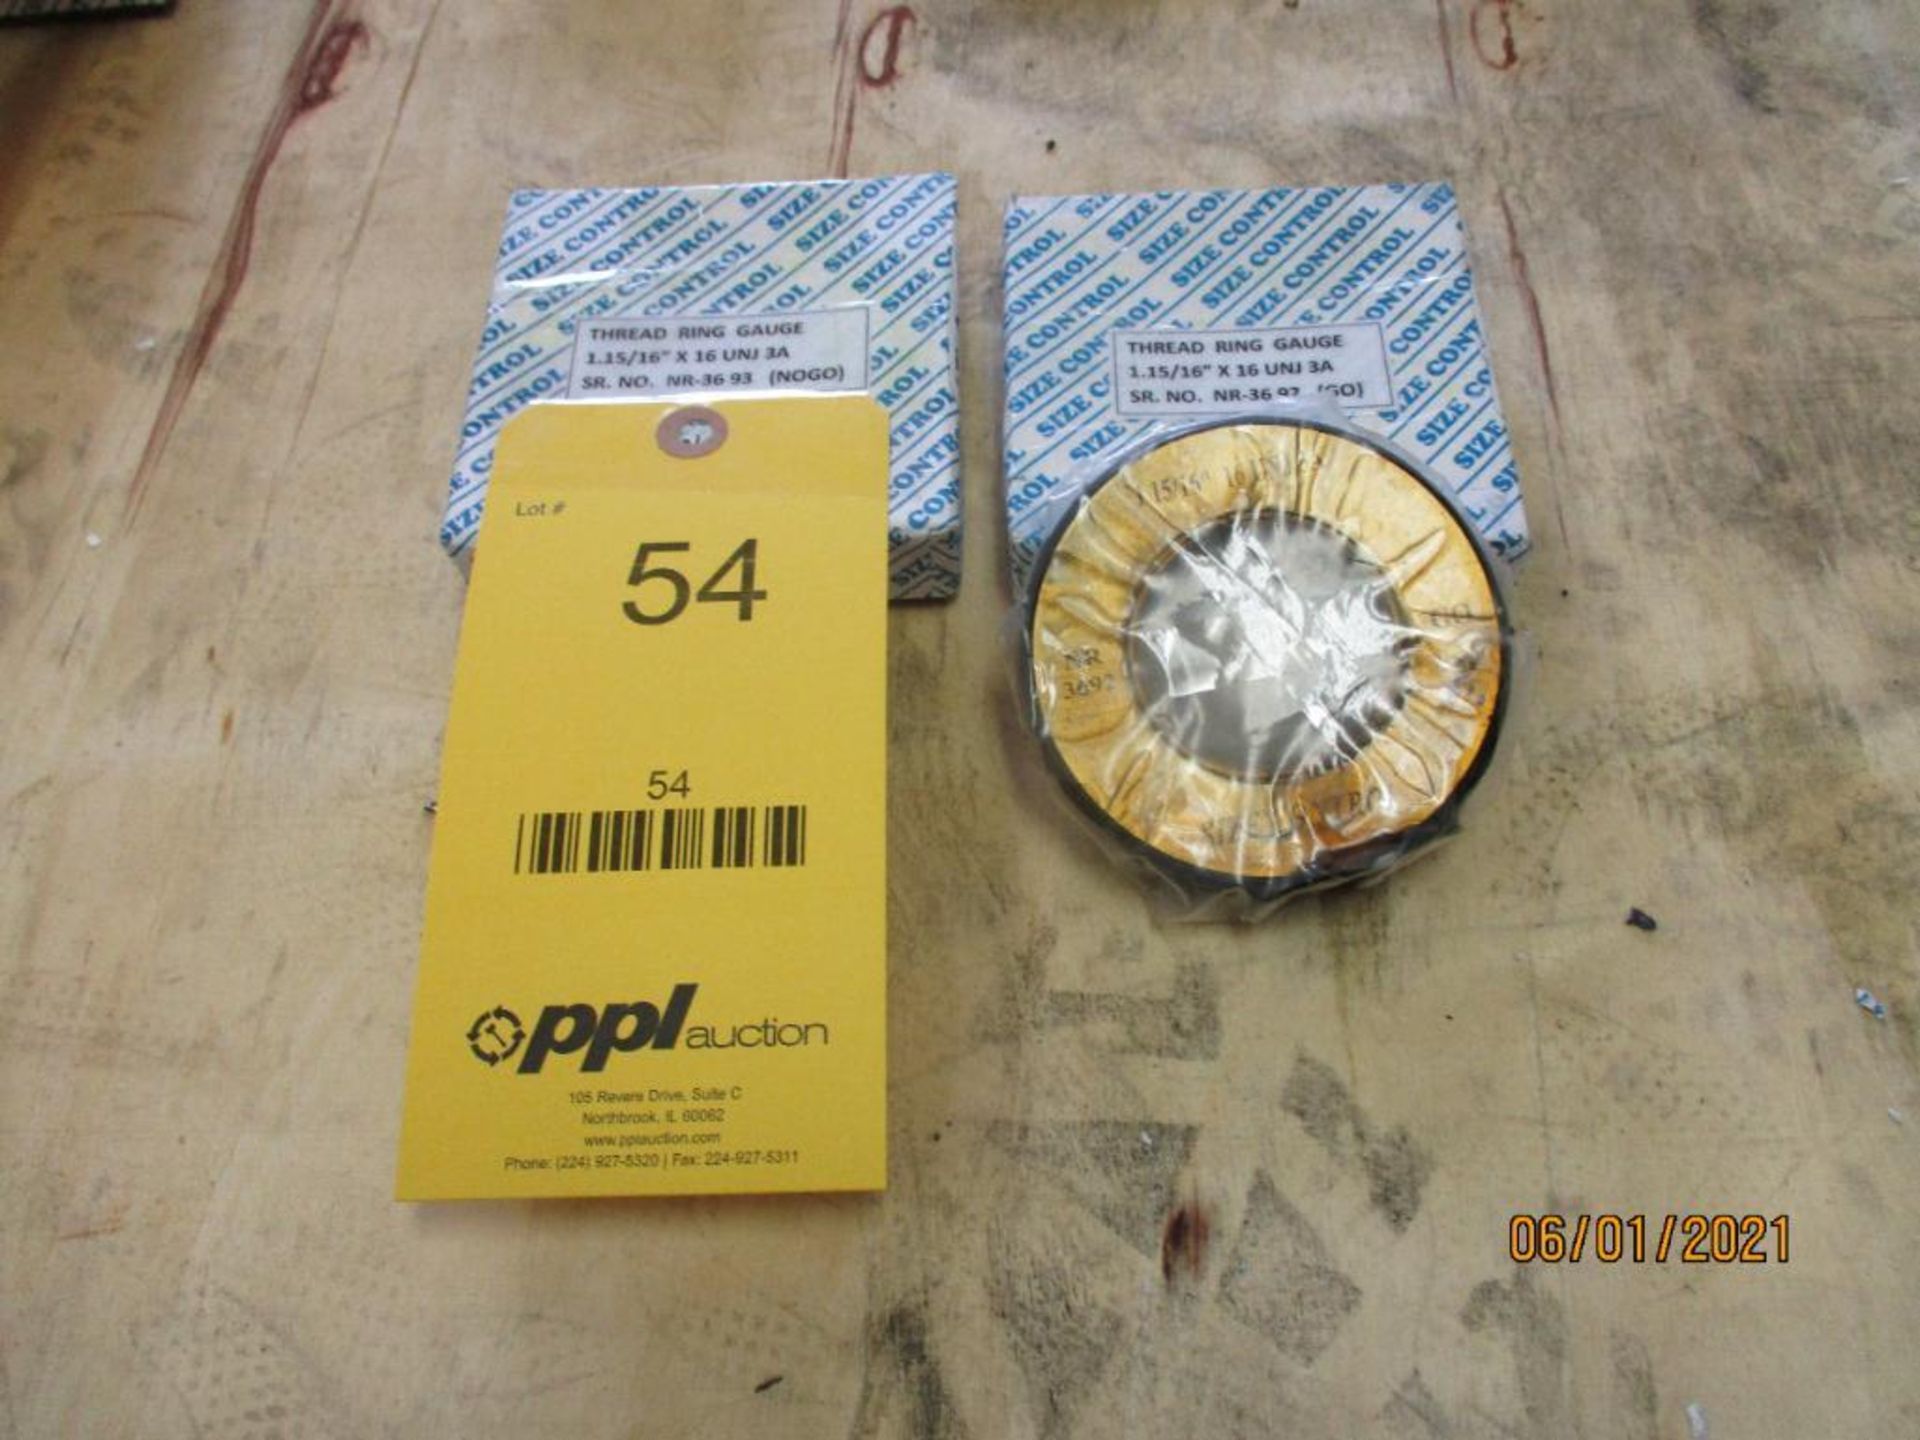 Set of GO/NOGO Thread Ring Gages, 1-15/16 in. - 16 UNJ-3A (All inspection eq. is like New and Mostly